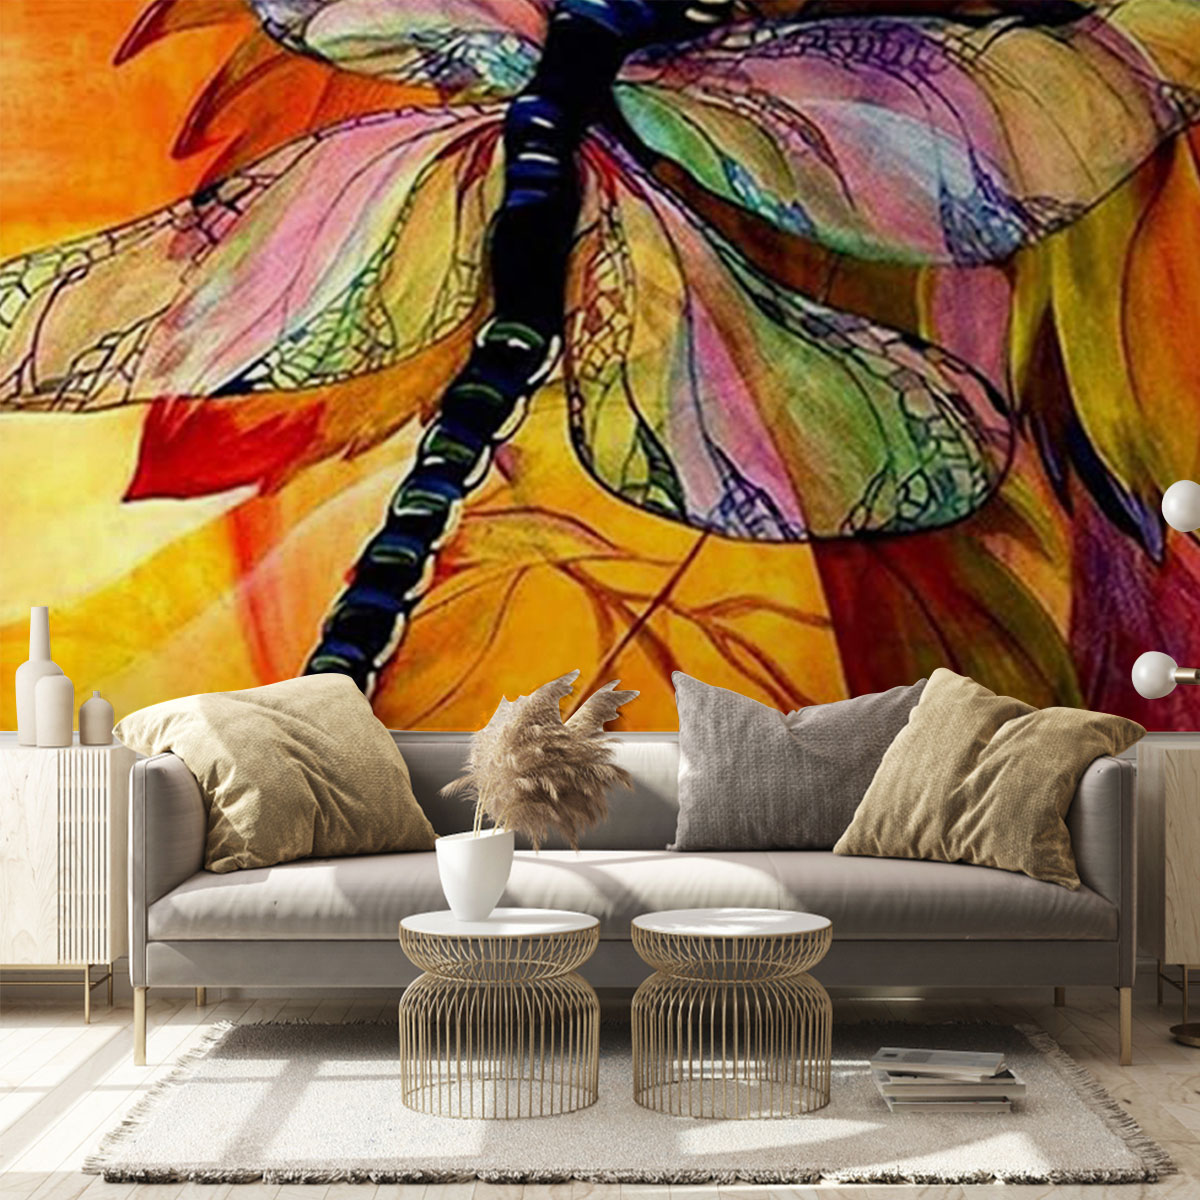 The Sunset Dragonfly Wall Mural